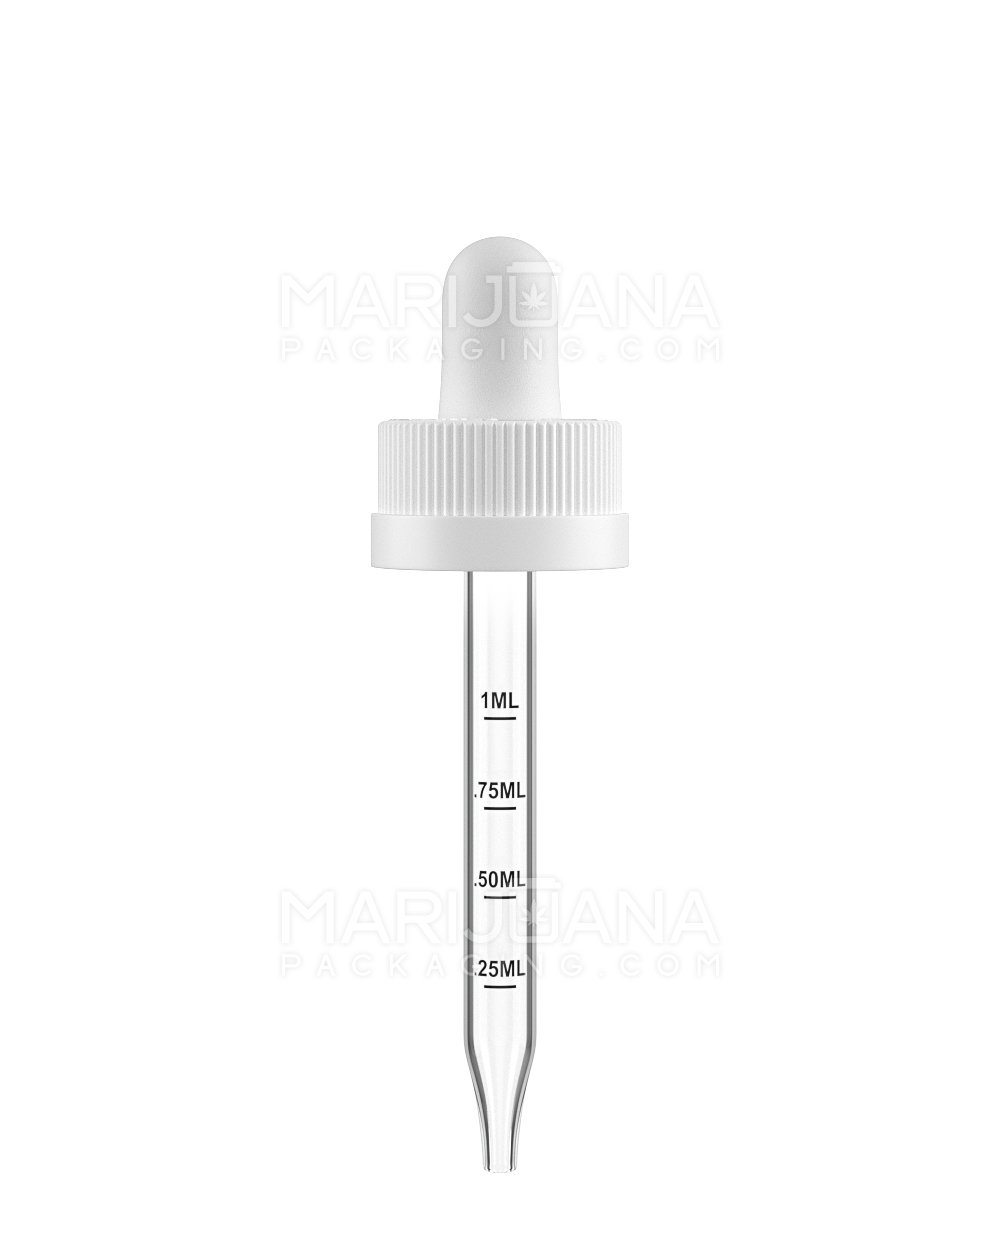 Child Resistant | White Graduated Ribbed Glass Dropper Cap | 1oz - 1mL - 360 Count - 1